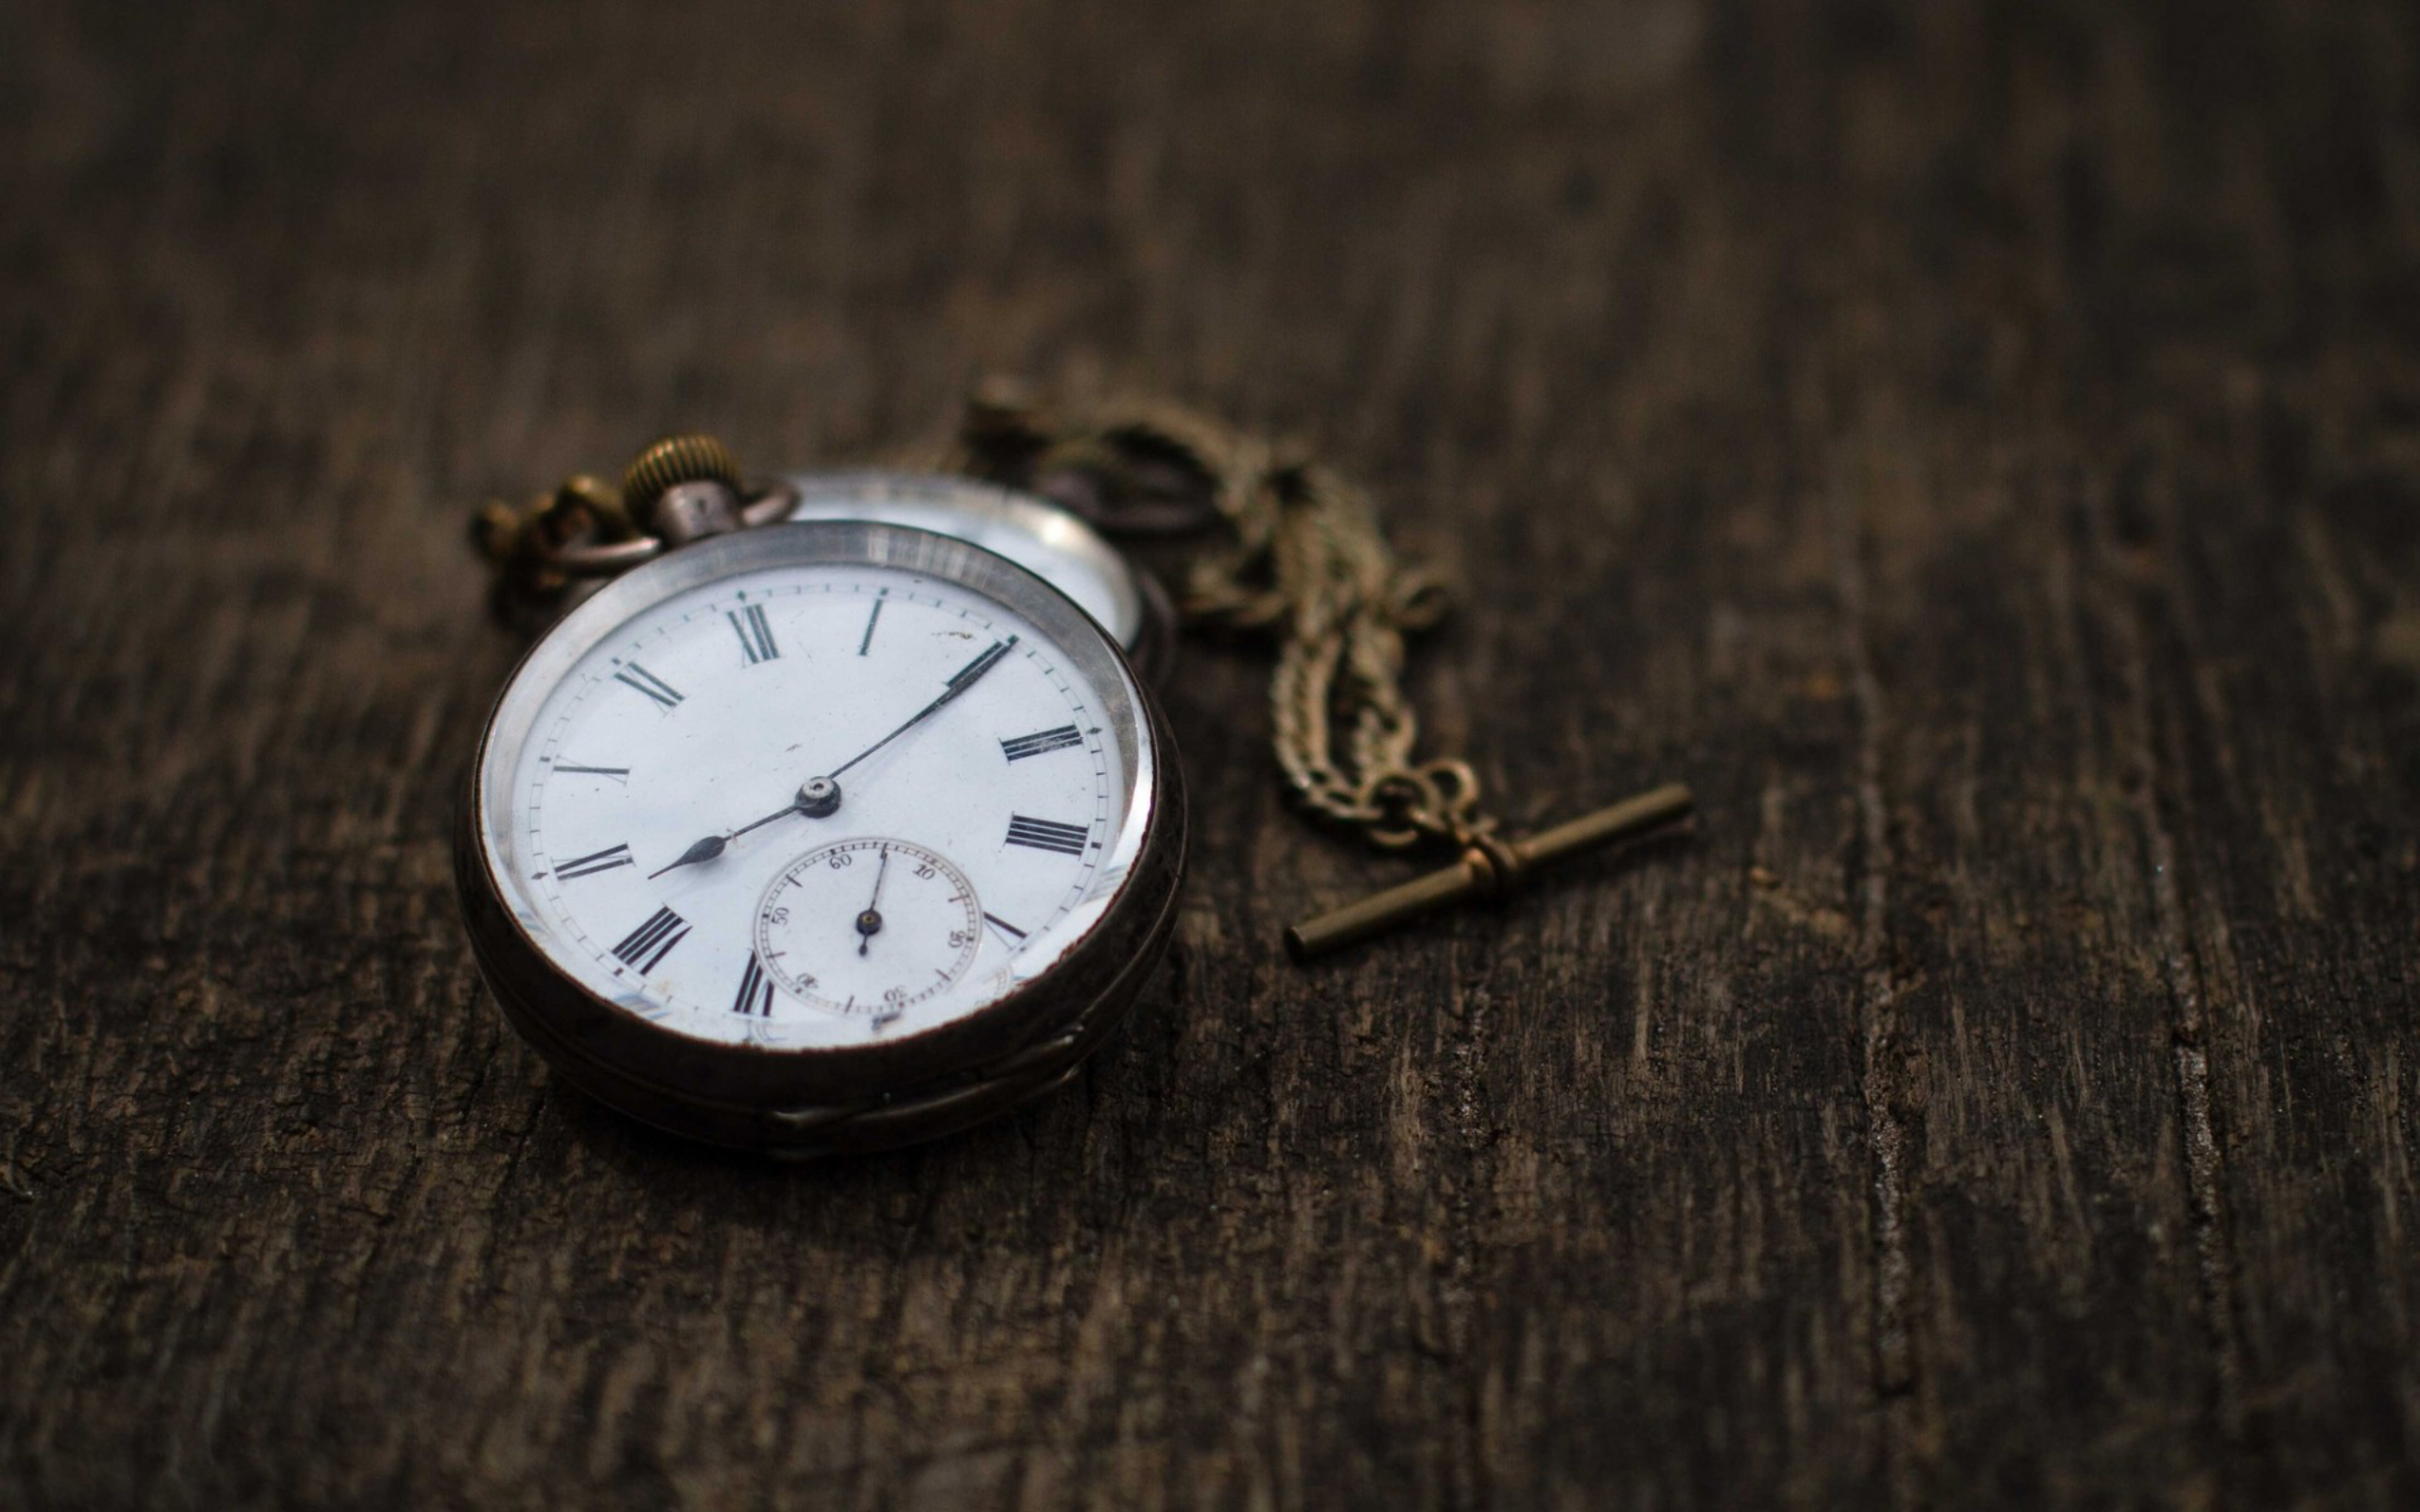 Download wallpaper Old pocket watch, time concepts, vintage watch for desktop with resolution 2560x1600. High Quality HD picture wallpaper